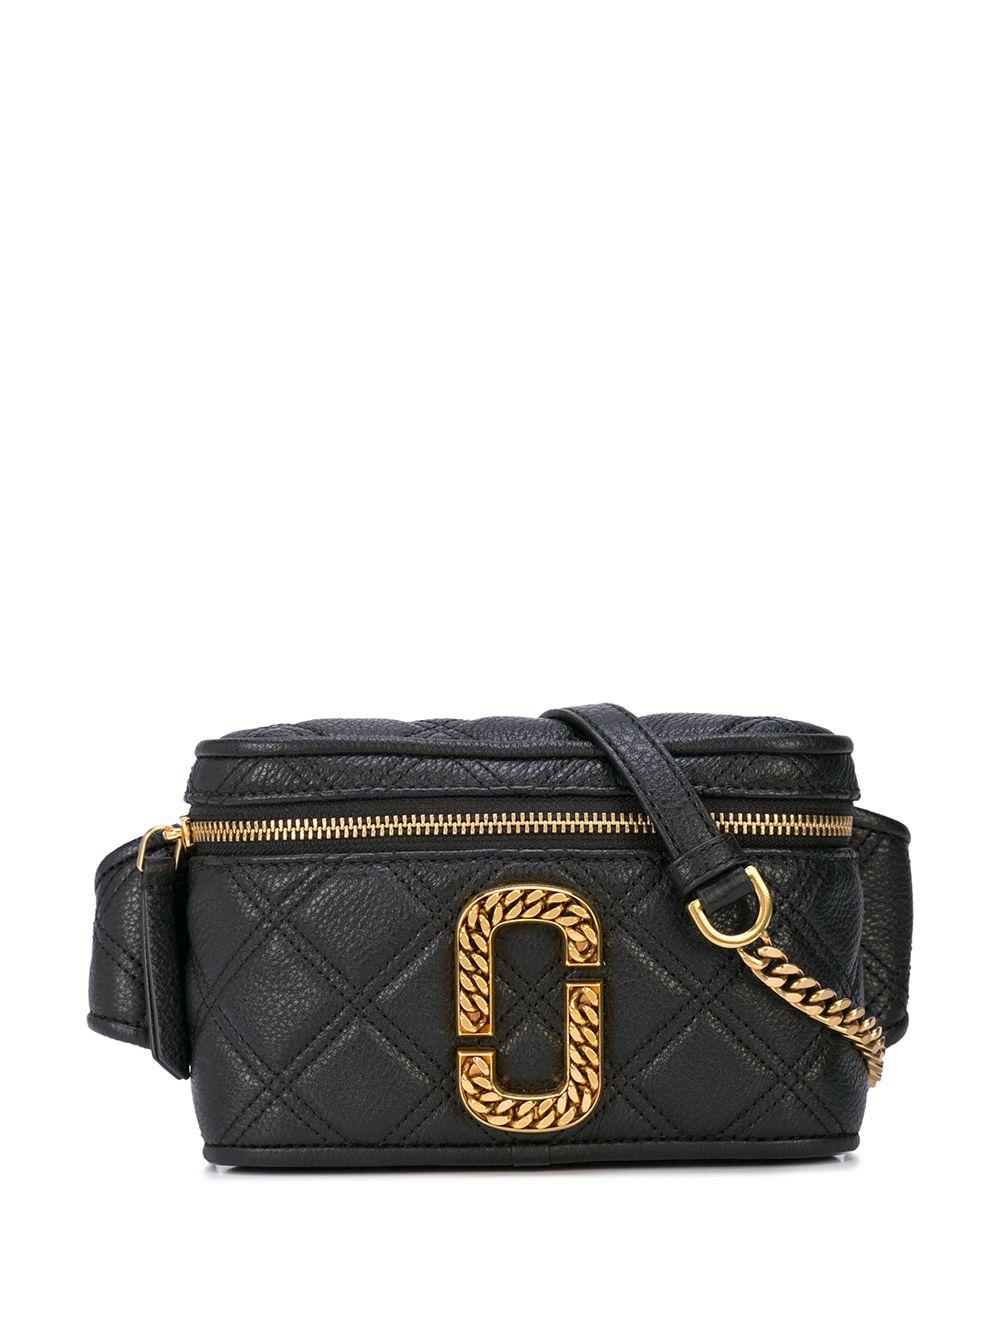 Marc Jacobs Leather The Status Belt Bag in Black - Save 64% - Lyst